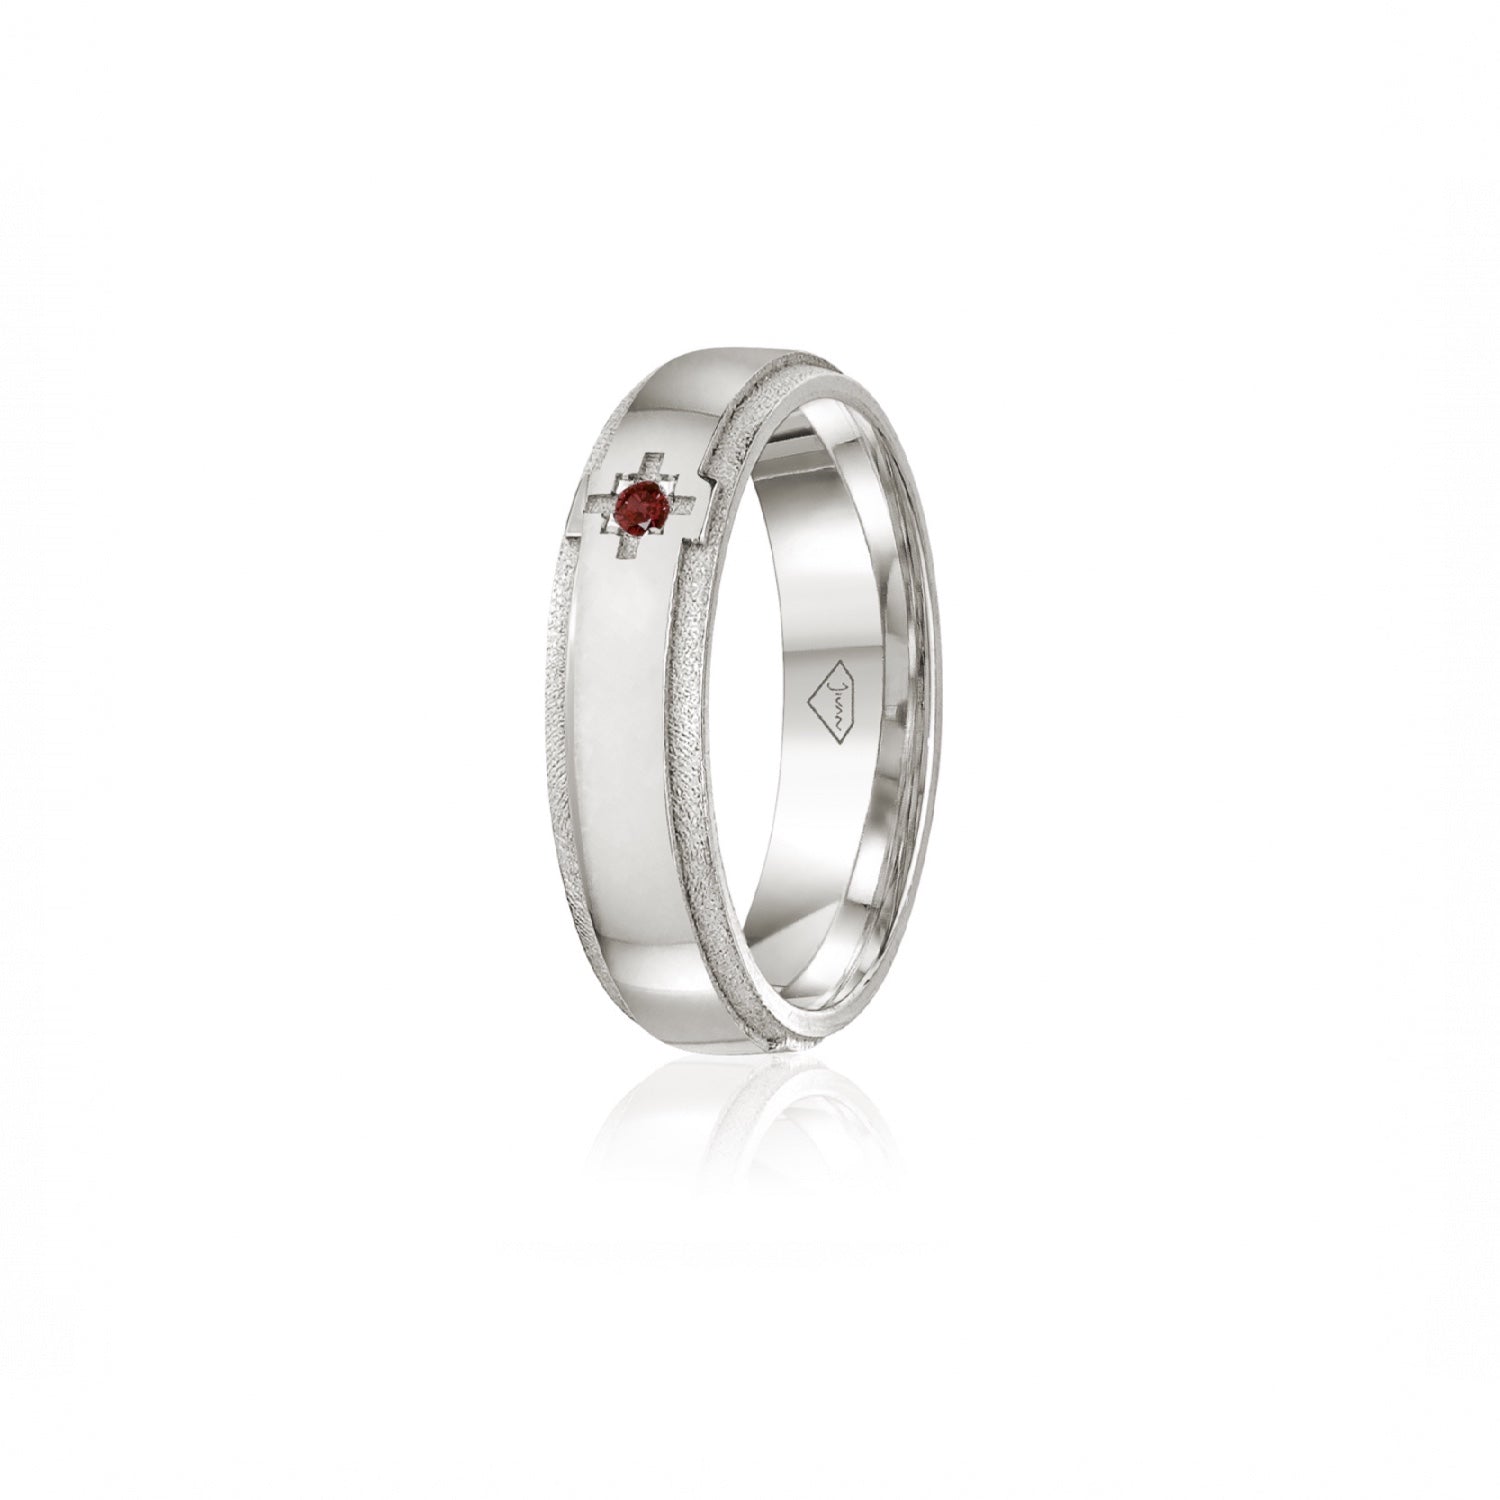 Ruby Accent Polished Finish Bevelled Edge 6-7 mm Wedding Ring in Platinum